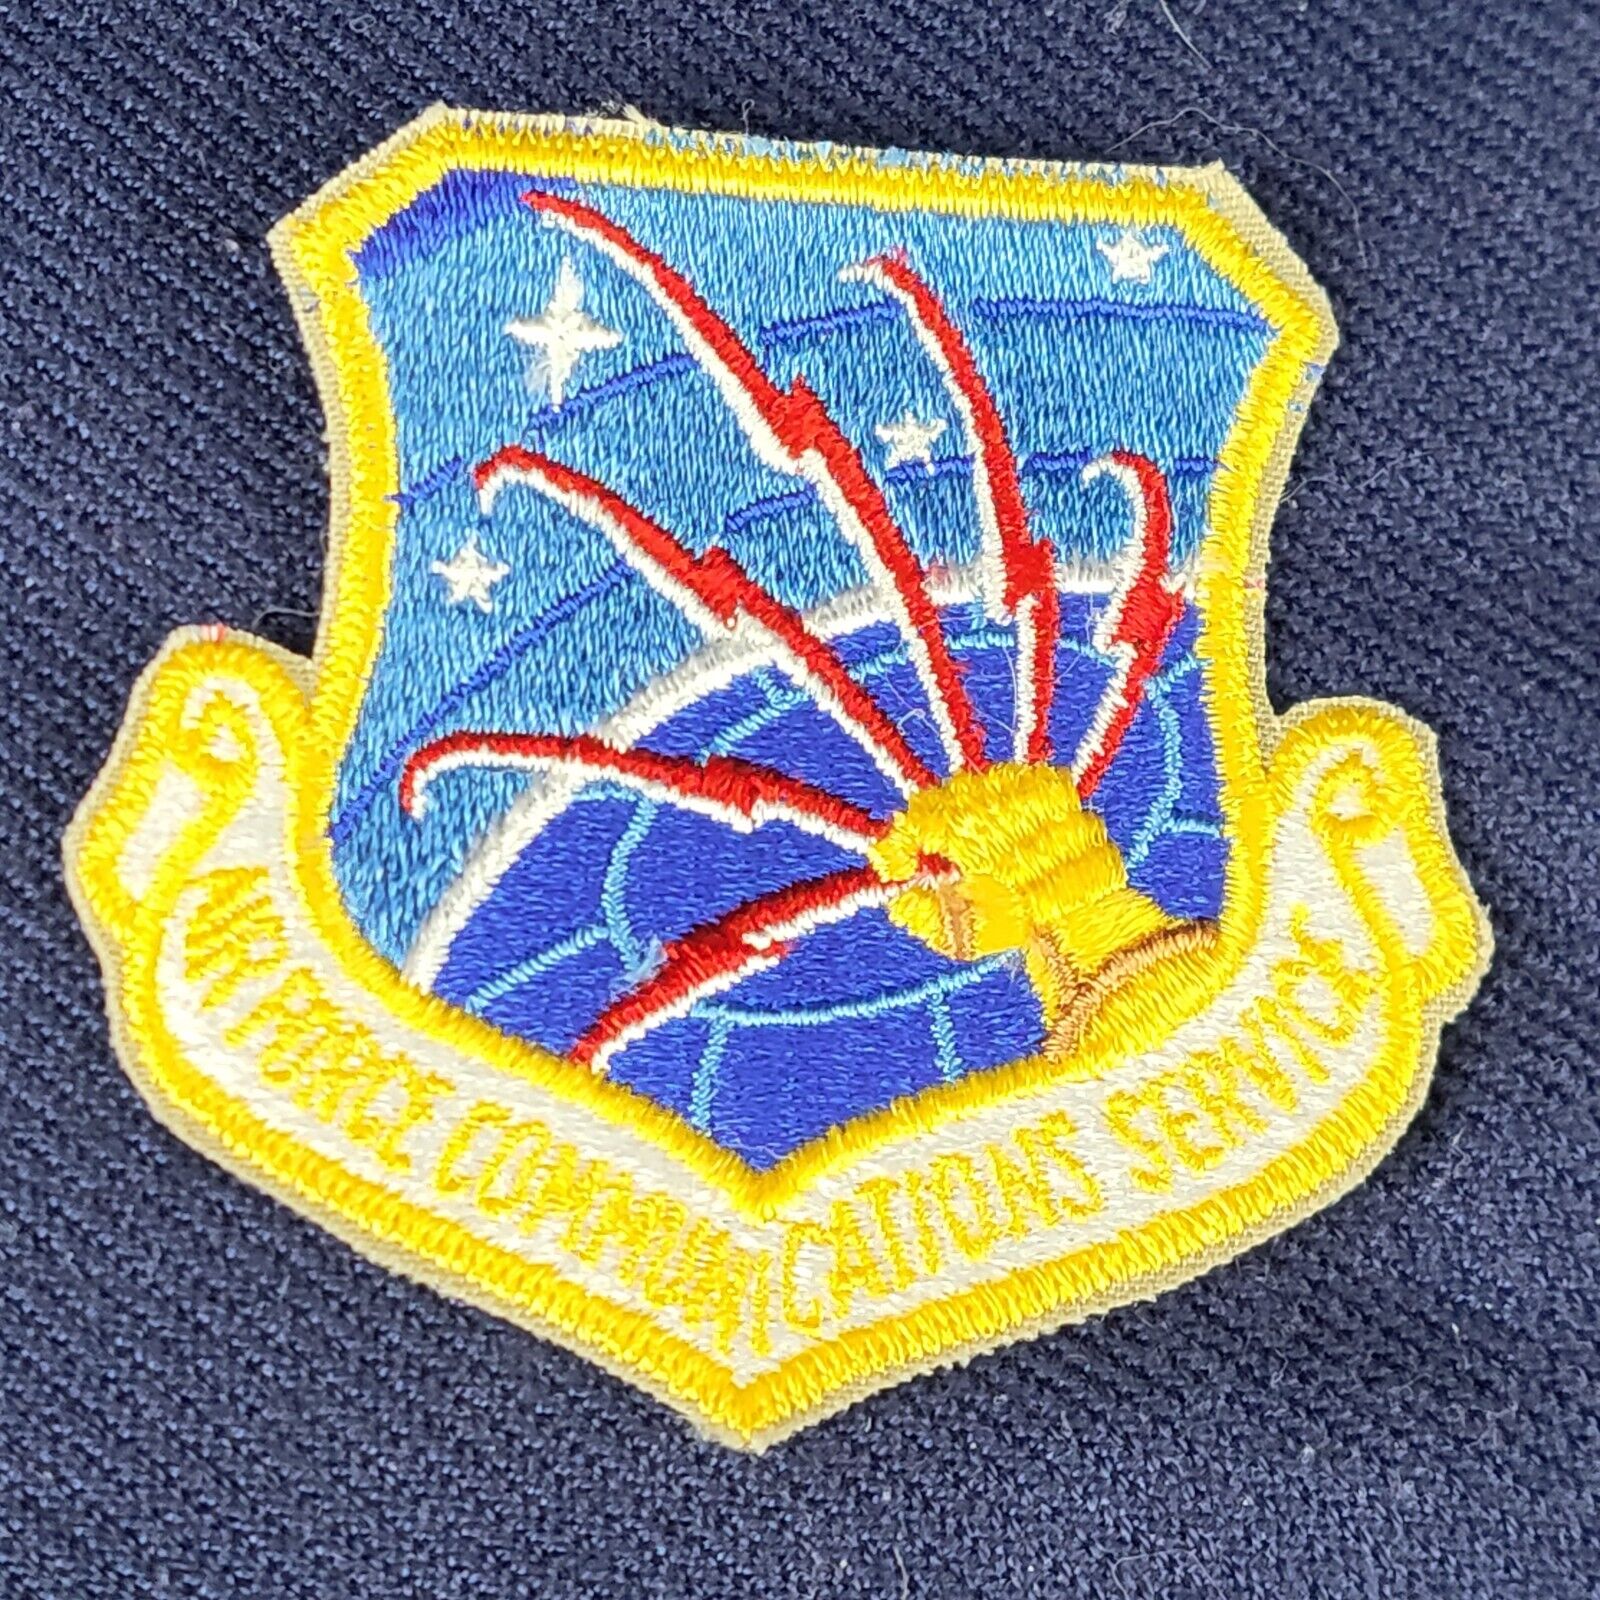 Embroidered Military Patch USAF Air Force Communications Service